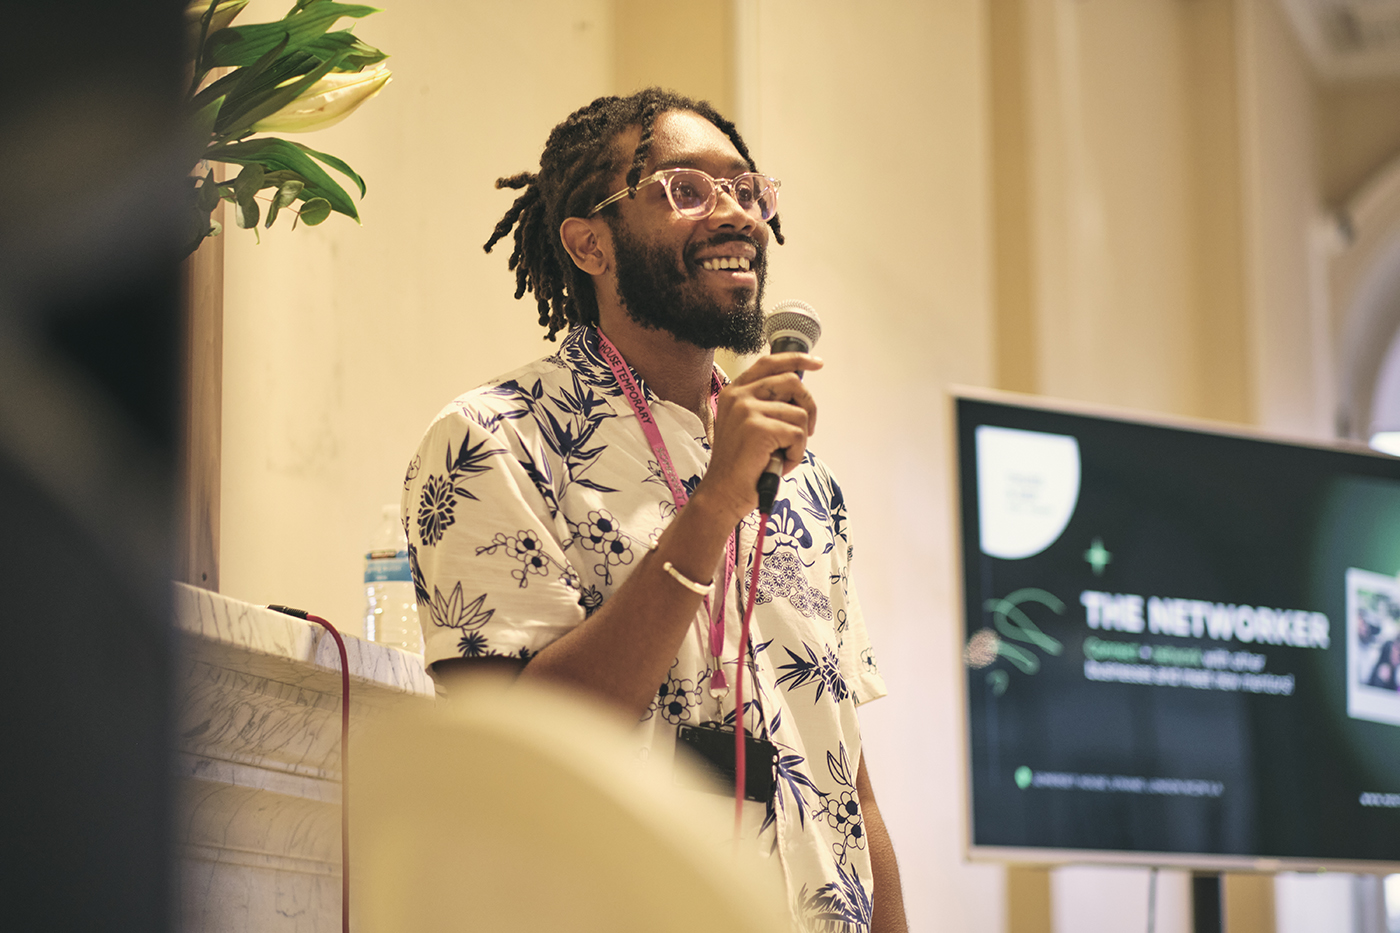 A photo of Akil Benjamin leading a workshop as part of the Black Business Incubator. Akil is Black man with medium length dreads and a beard. He is smiling and holding a microphone.